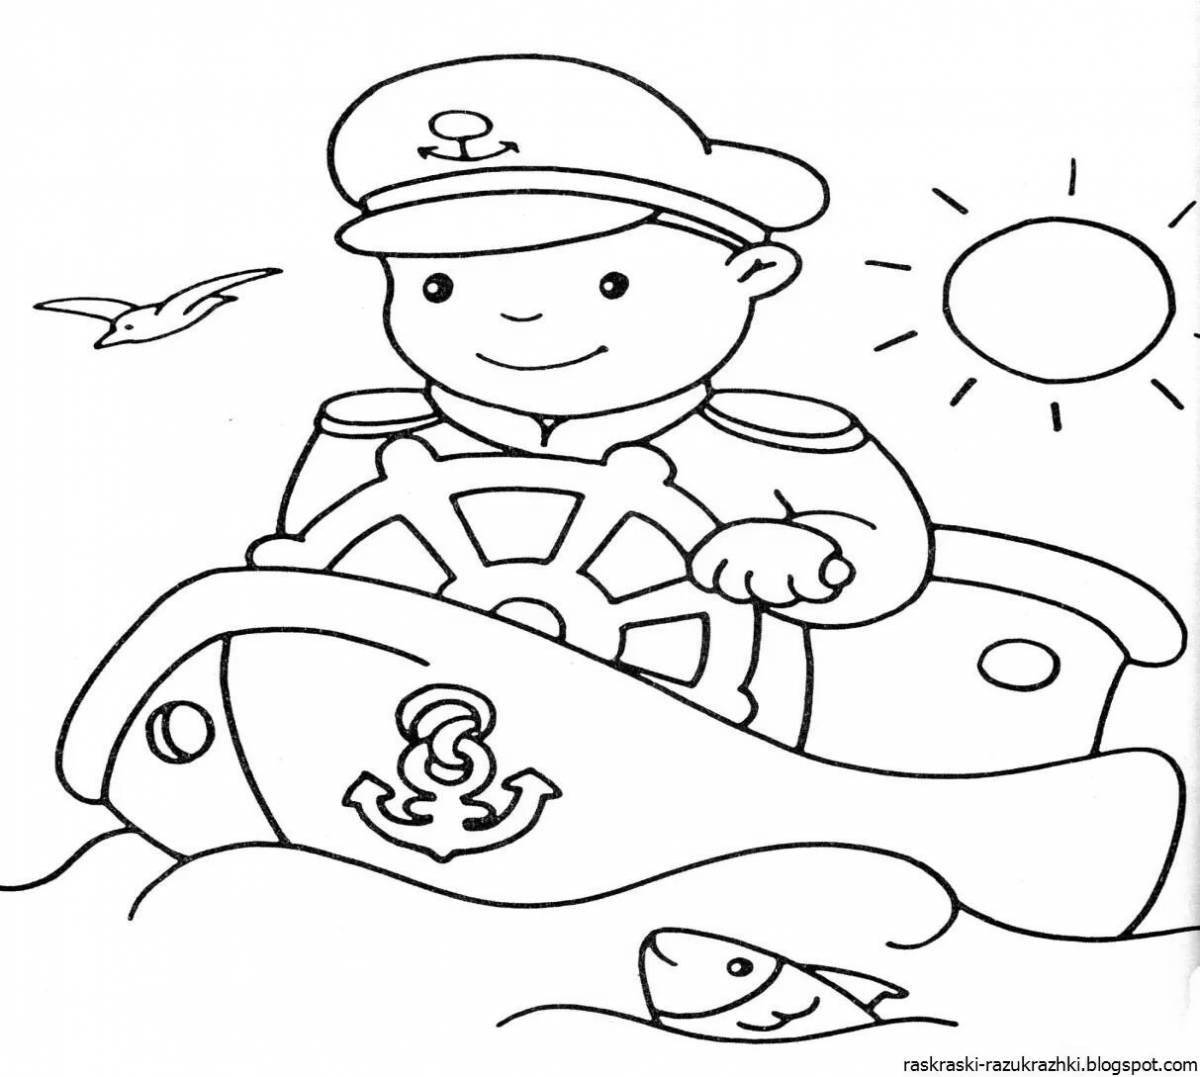 Colorful military profession coloring book for 3-4 year olds